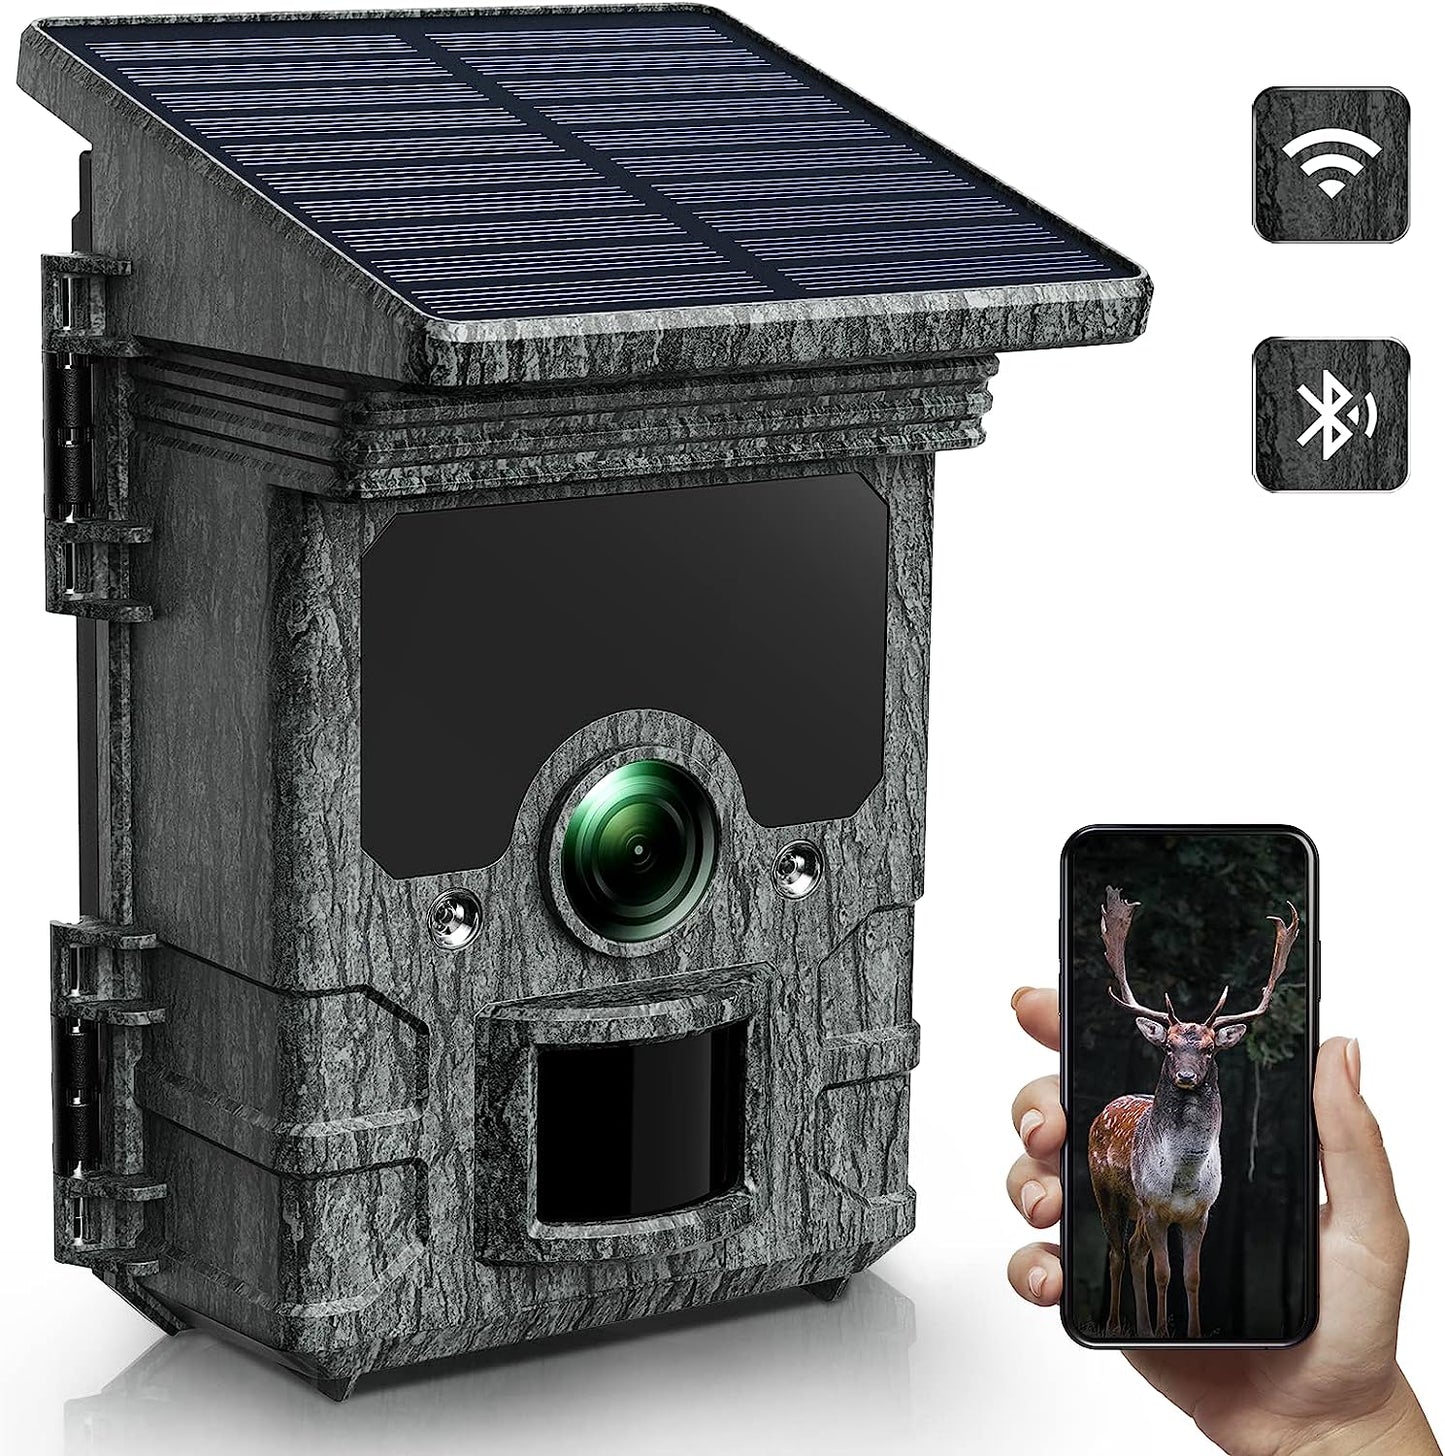 CAMPARK Solar Powered Trail Camera with SD Card Rechargeable 4400mAh 4K 48MP WiFi Game Camera with 0.1s Motion Activated Night Vision Waterproof IP66 for Wildlife Monitoring Hunting Trail Cam